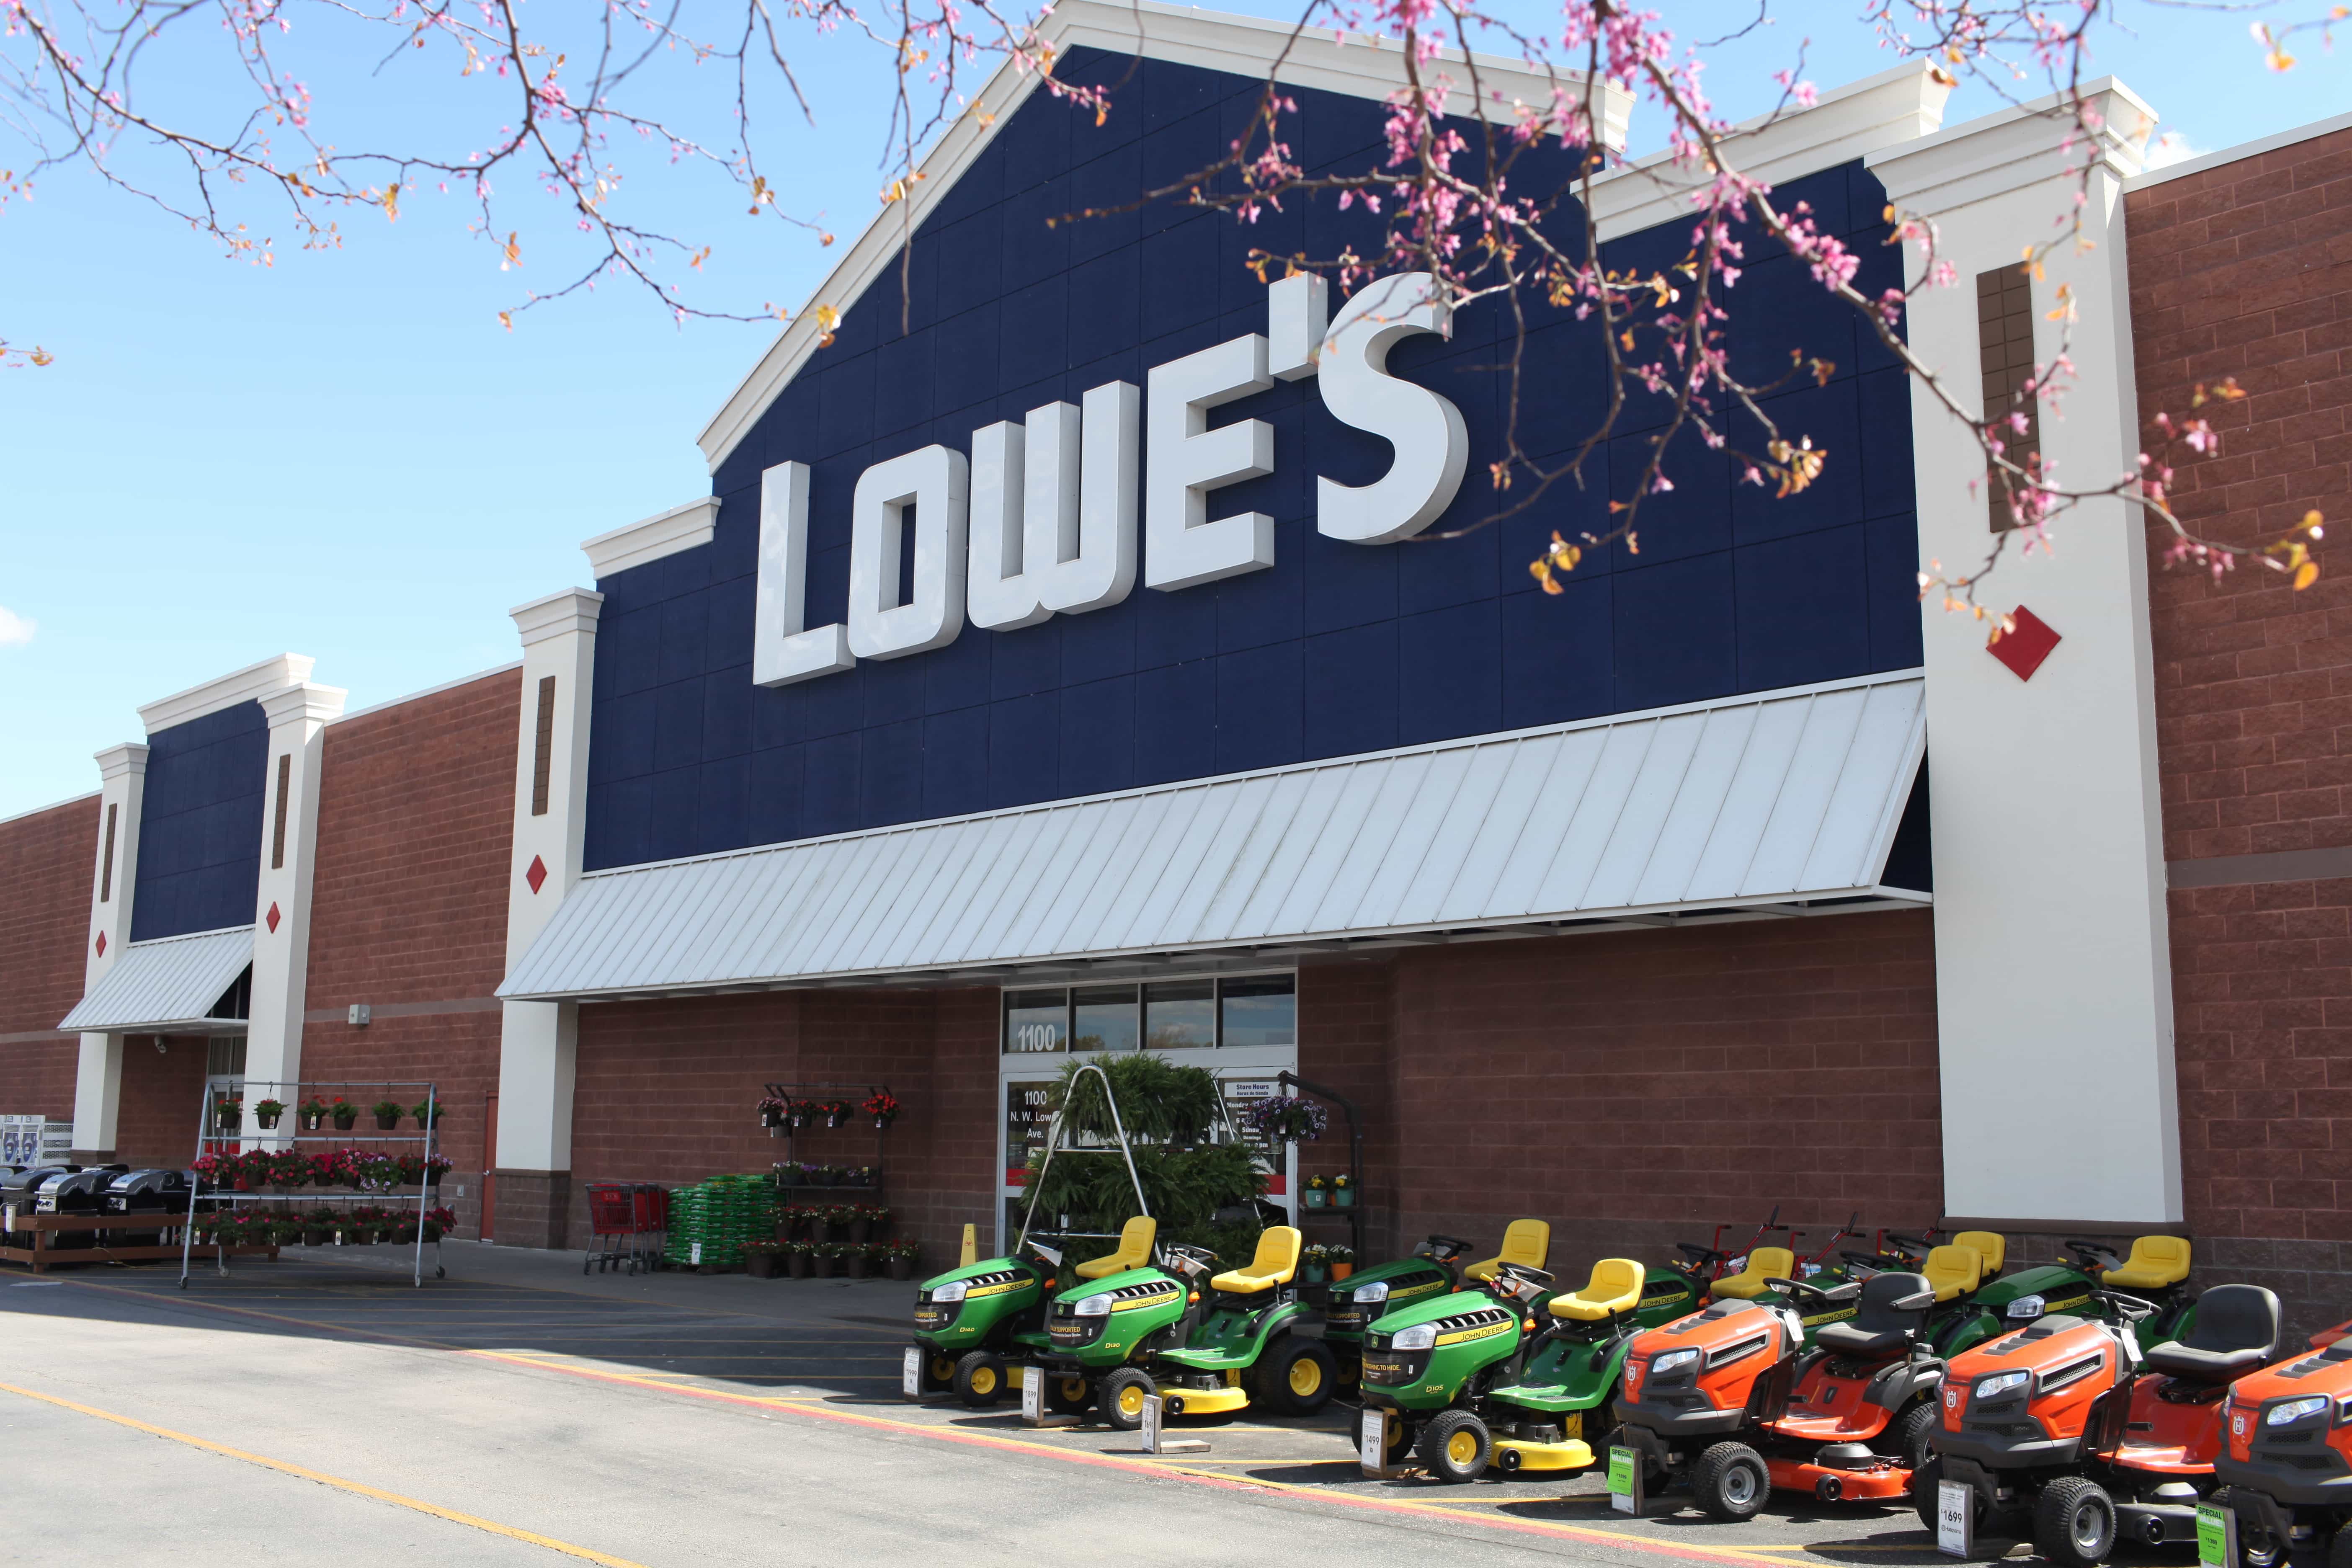 lowes in the news today